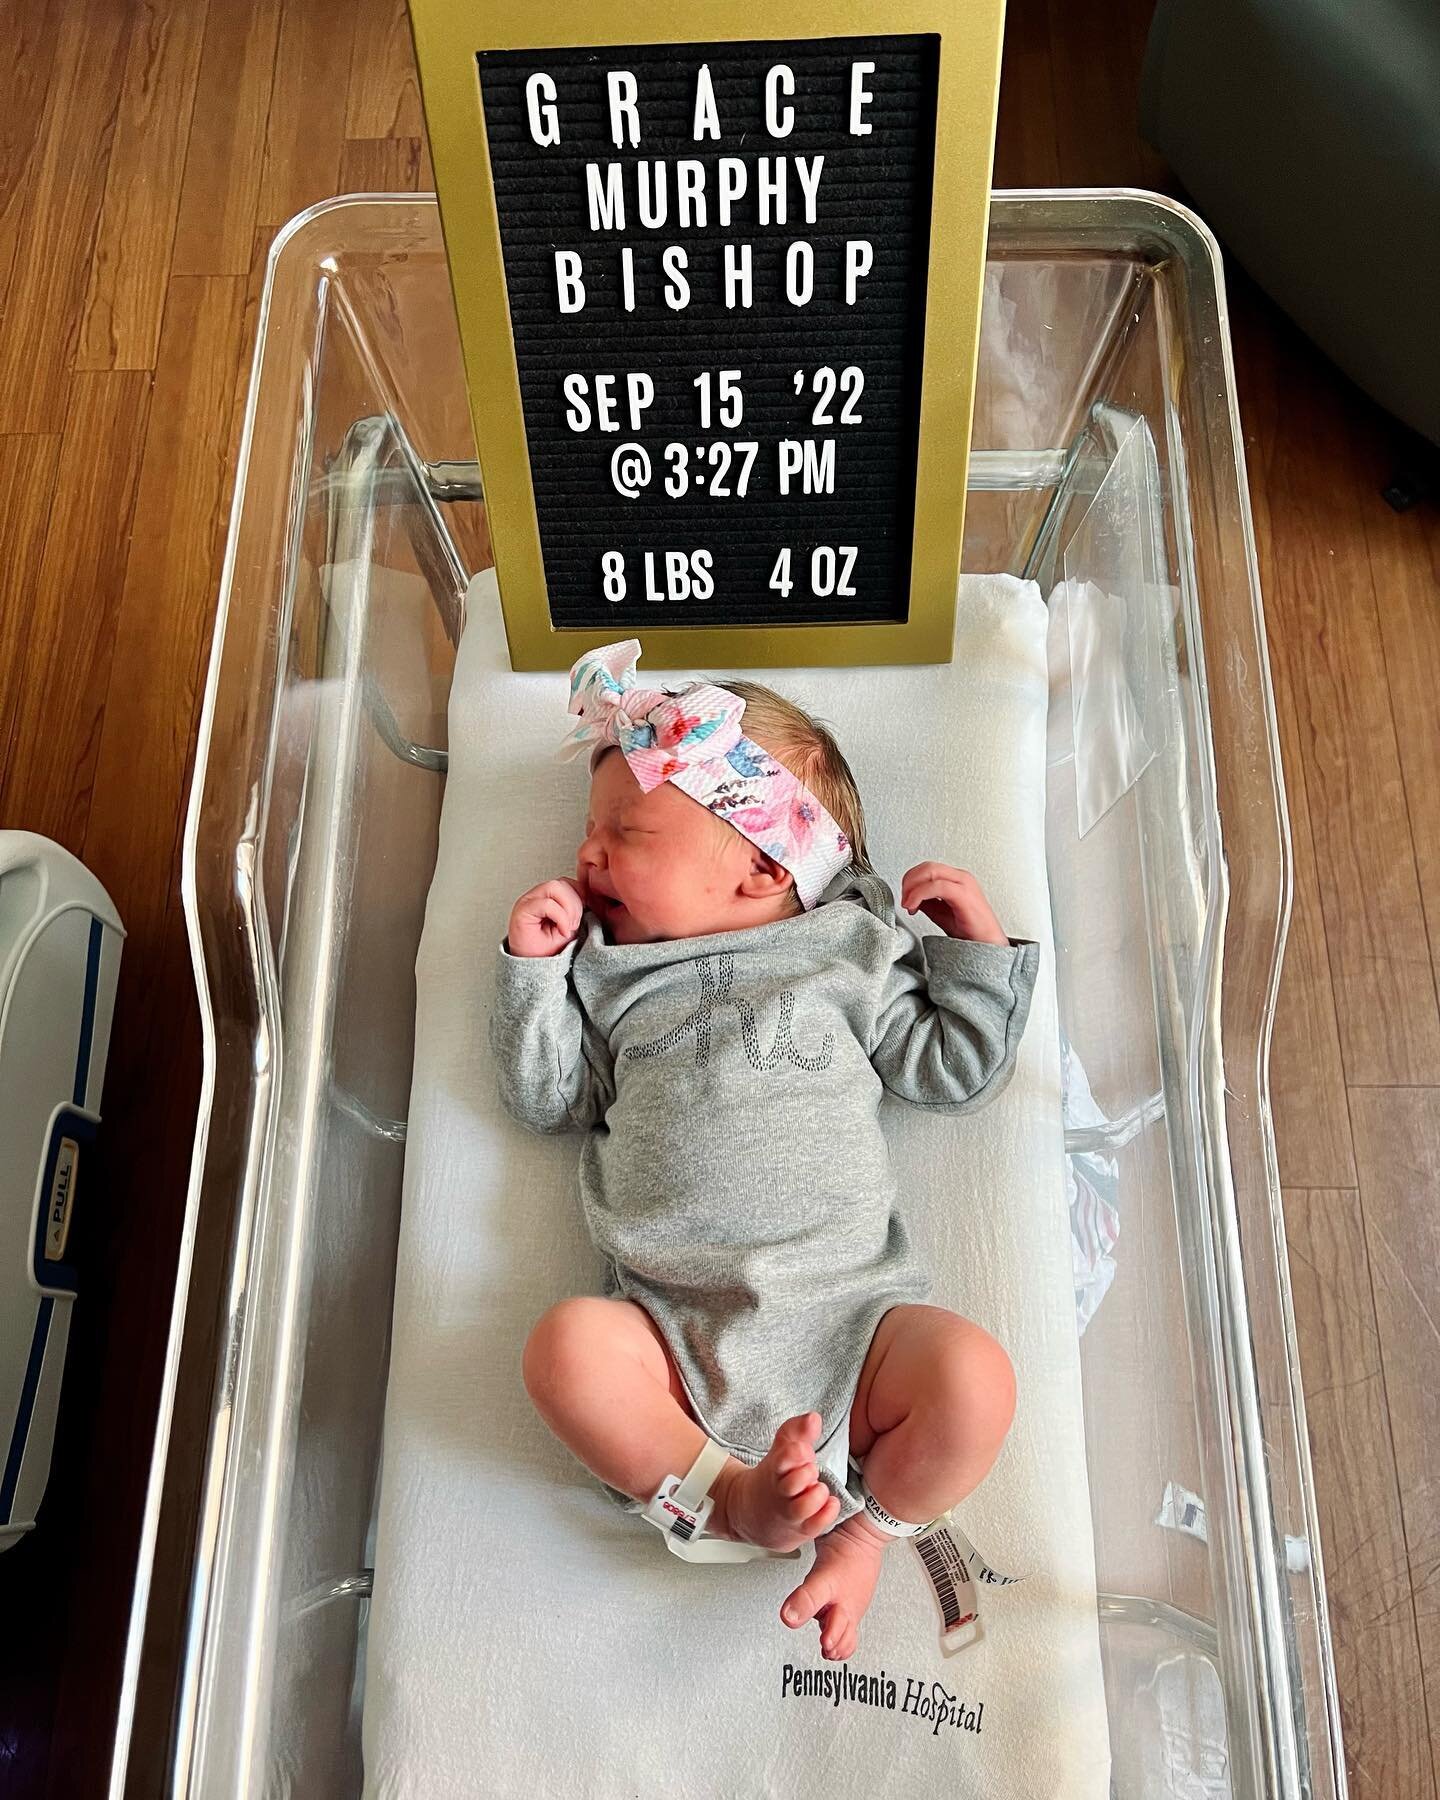 Grace Murphy Bishop arrived at 3:27pm on Thursday, 9-15-2022 via c-section at 8 lbs, 4 oz and 20&rdquo; long.

Both Mom &amp; our Gracie girl are doing great! Everything went super smooth and the operating team at Pennsylvania Hospital was amazing. K